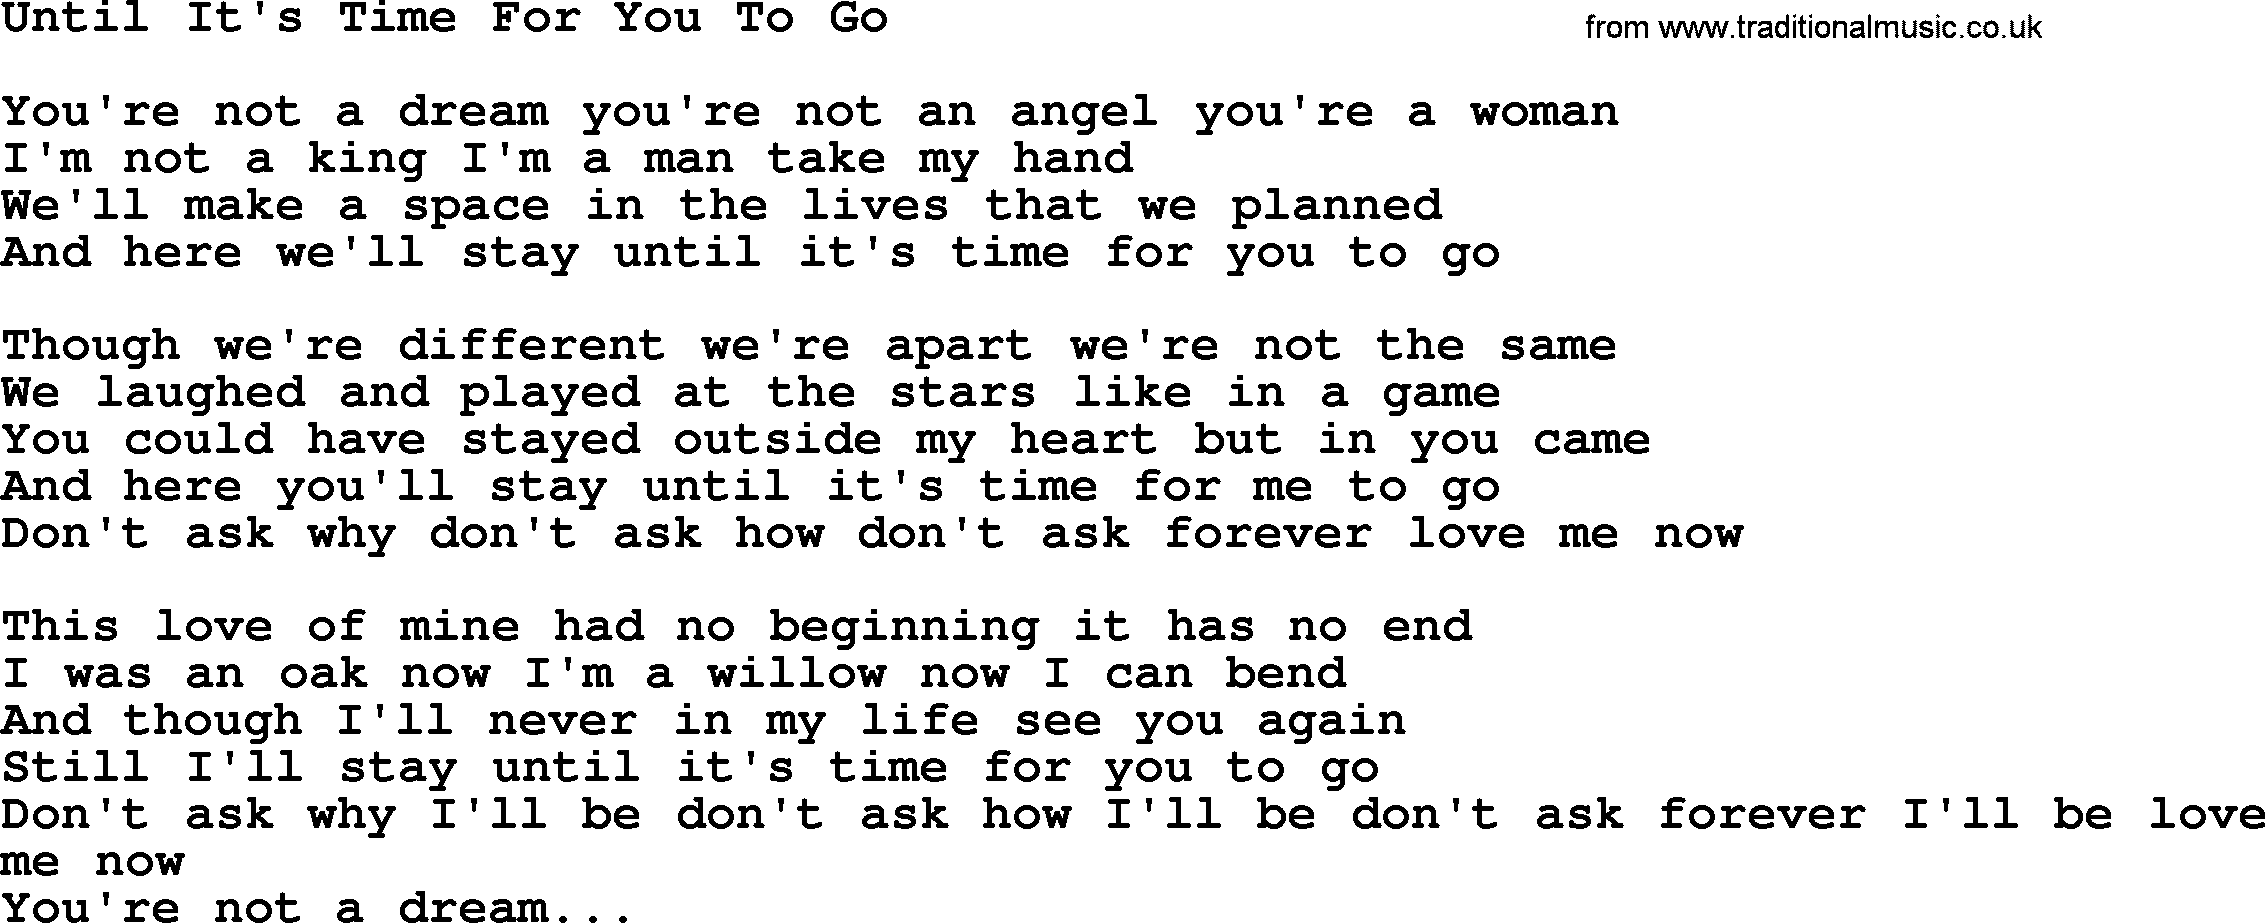 Willie Nelson song: Until It's Time For You To Go lyrics